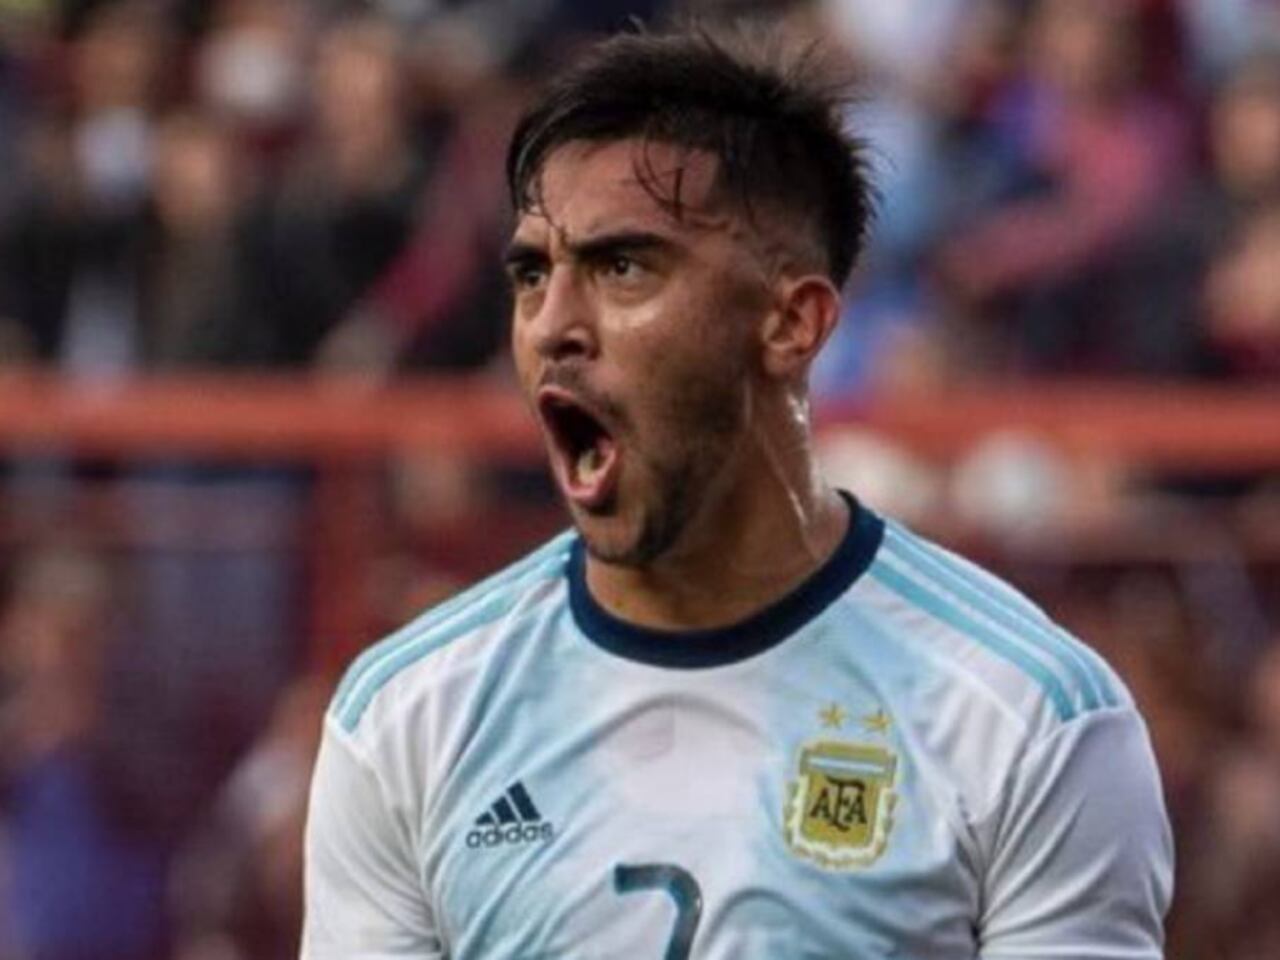 Who is Nicolás González, the player who opened the scoring for Argentina's victory over Venezuela?